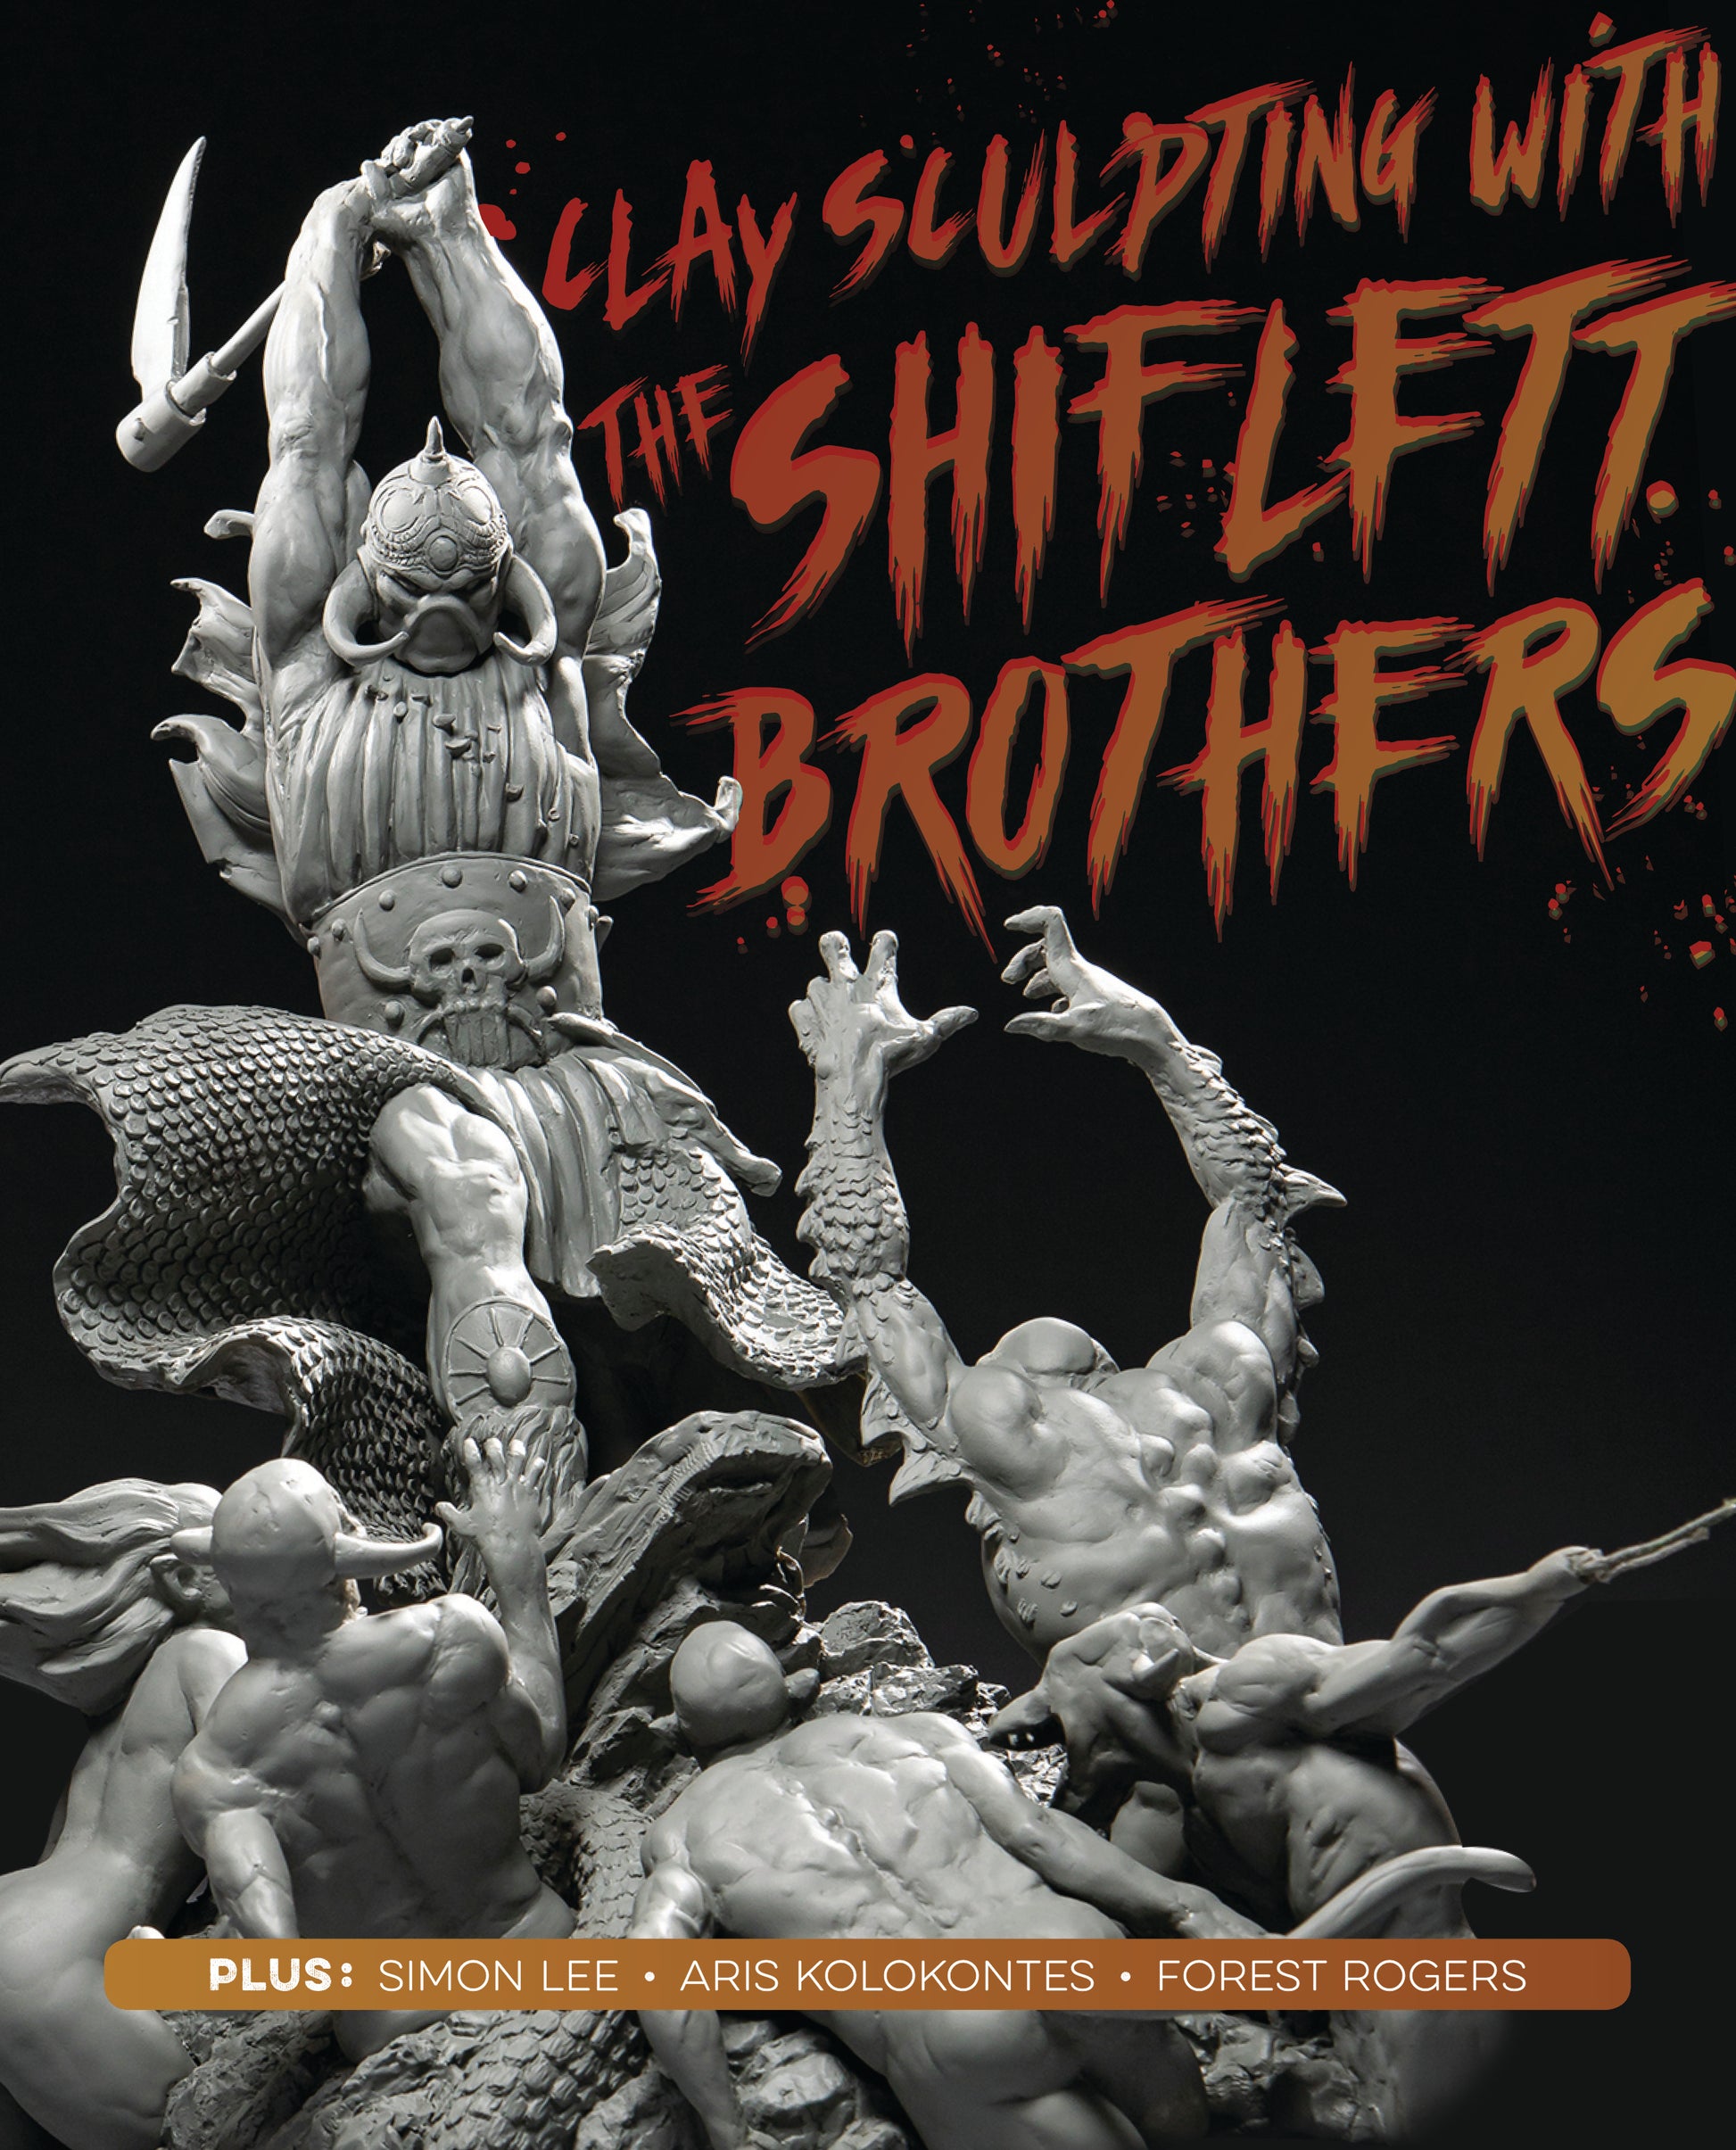 Cover of 'Clay Sculpting With The Shiflett Brothers' book, showing a 3d sculpted scene of a fantasy warrior fighting monsters